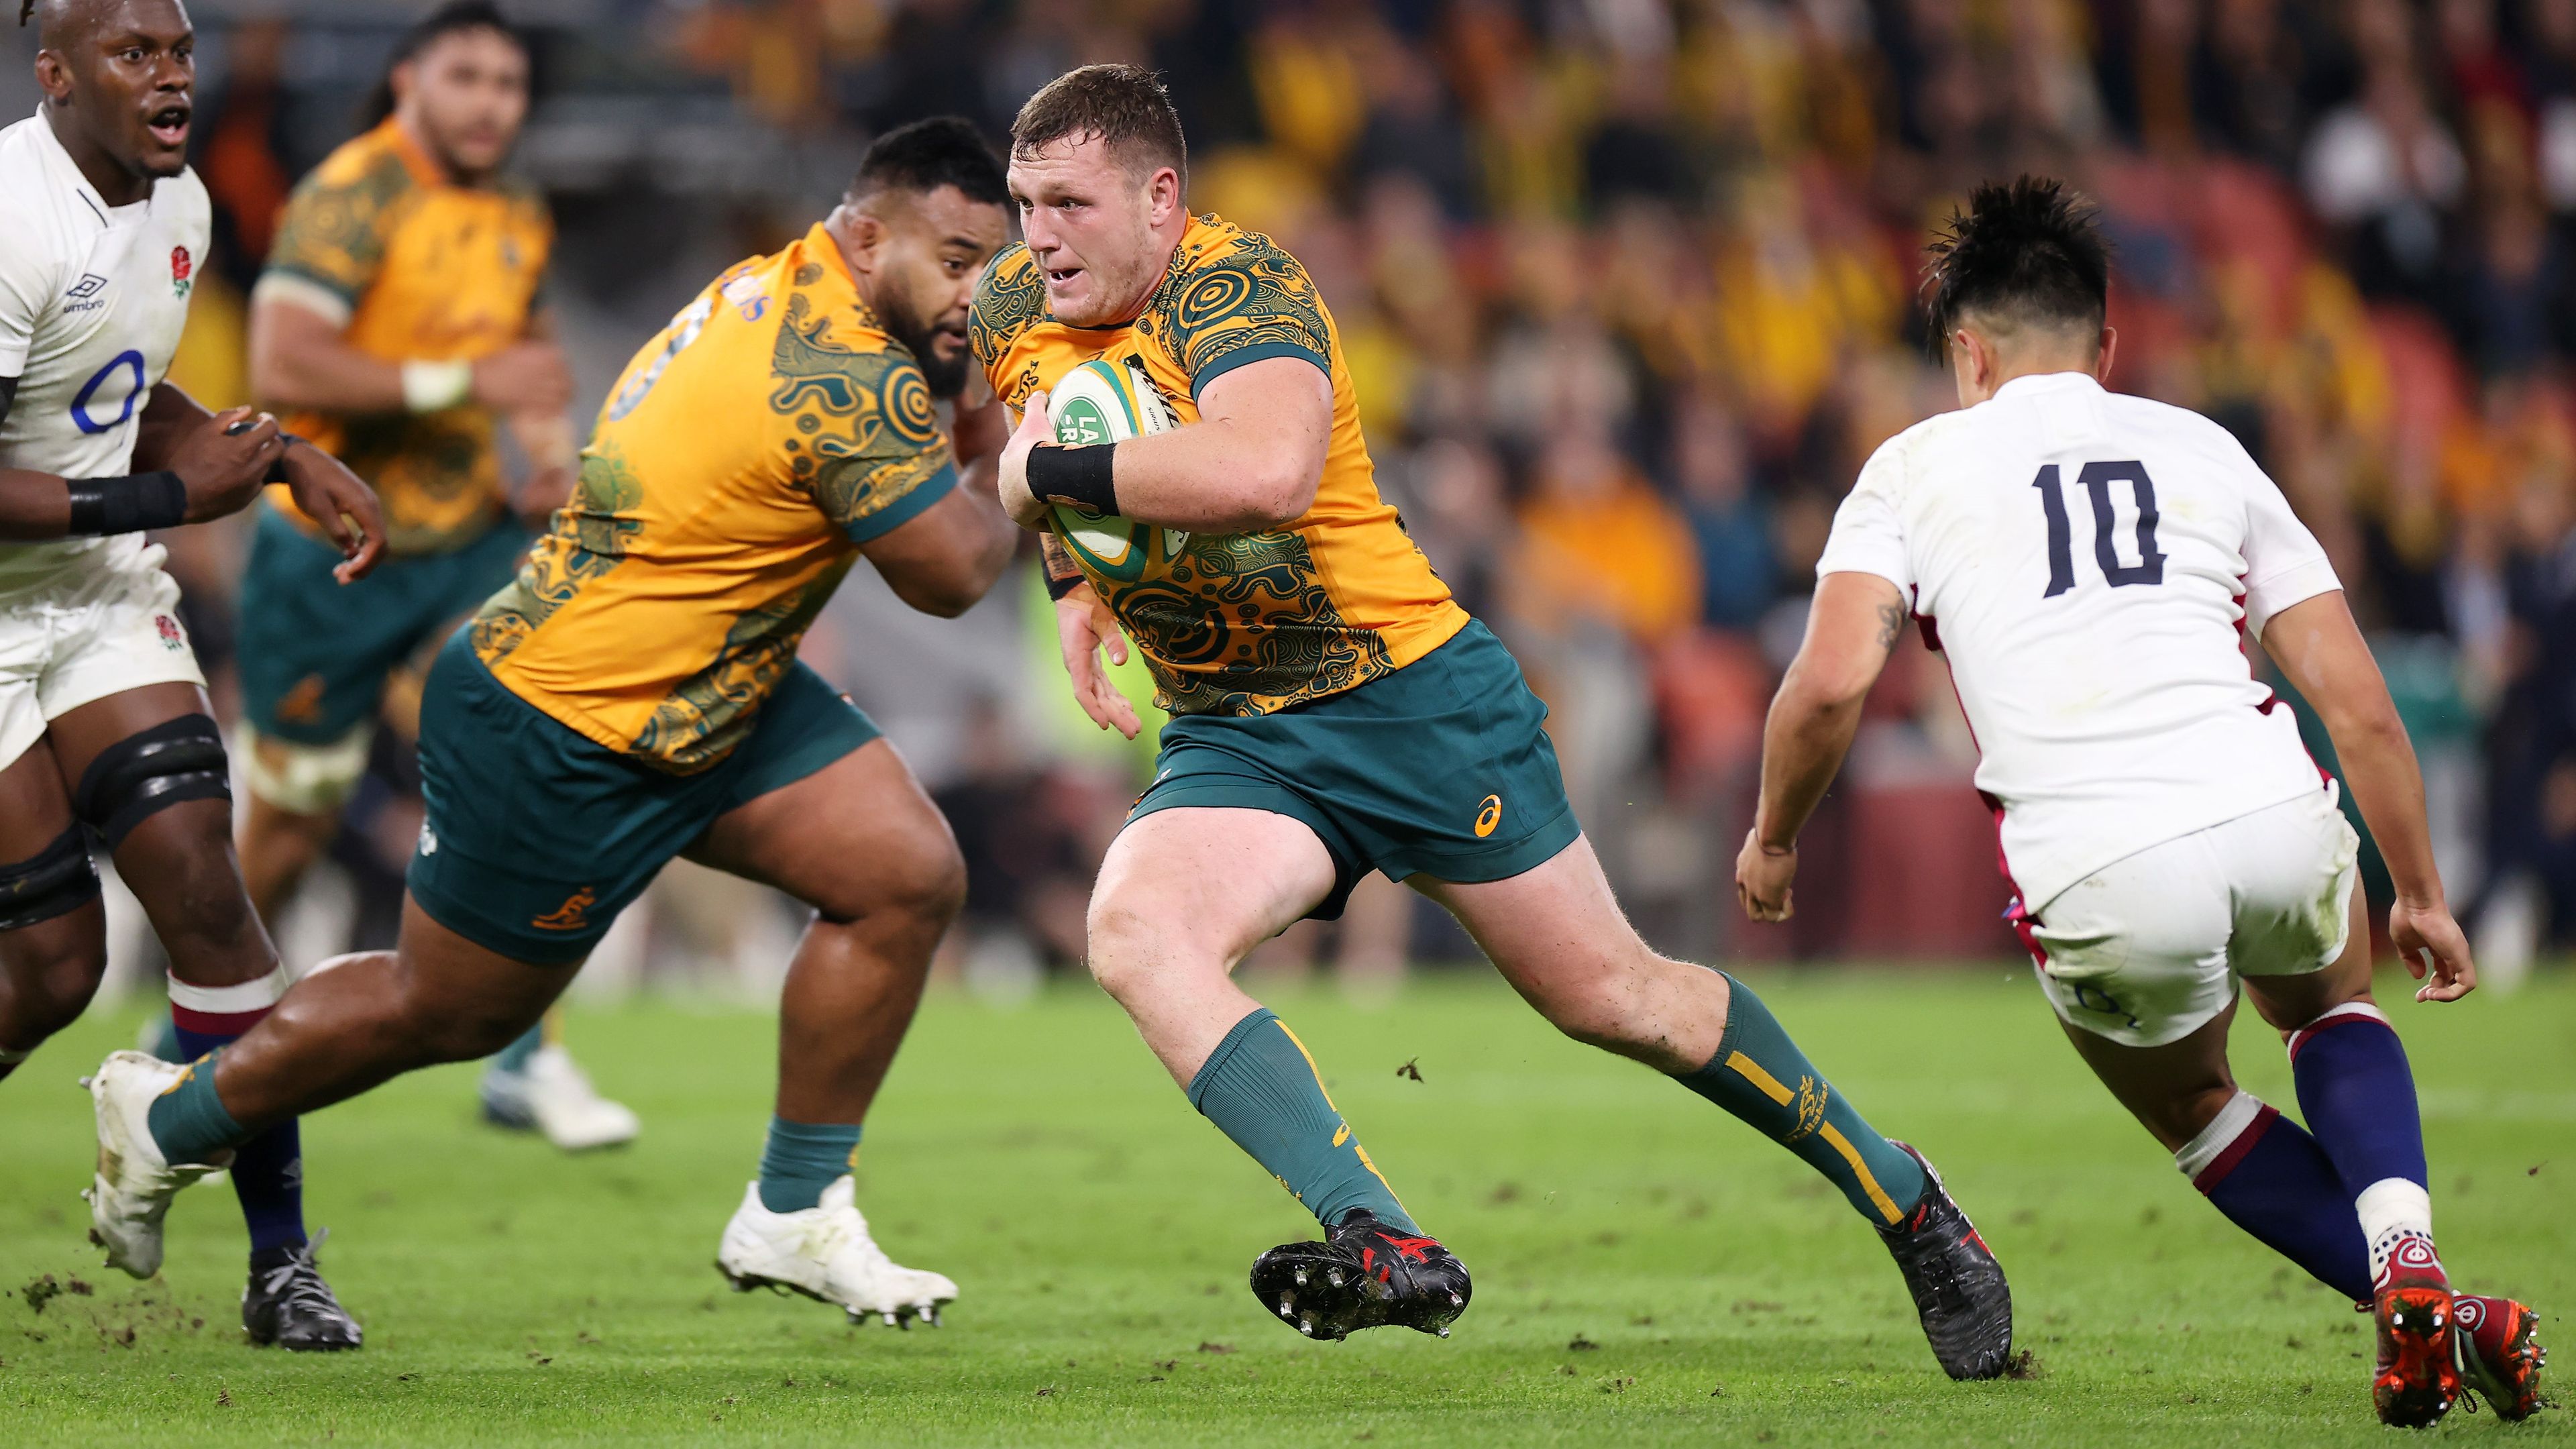 Wallabies injury woes continue as prop Angus Bell confirmed to miss European tour for foot surgery